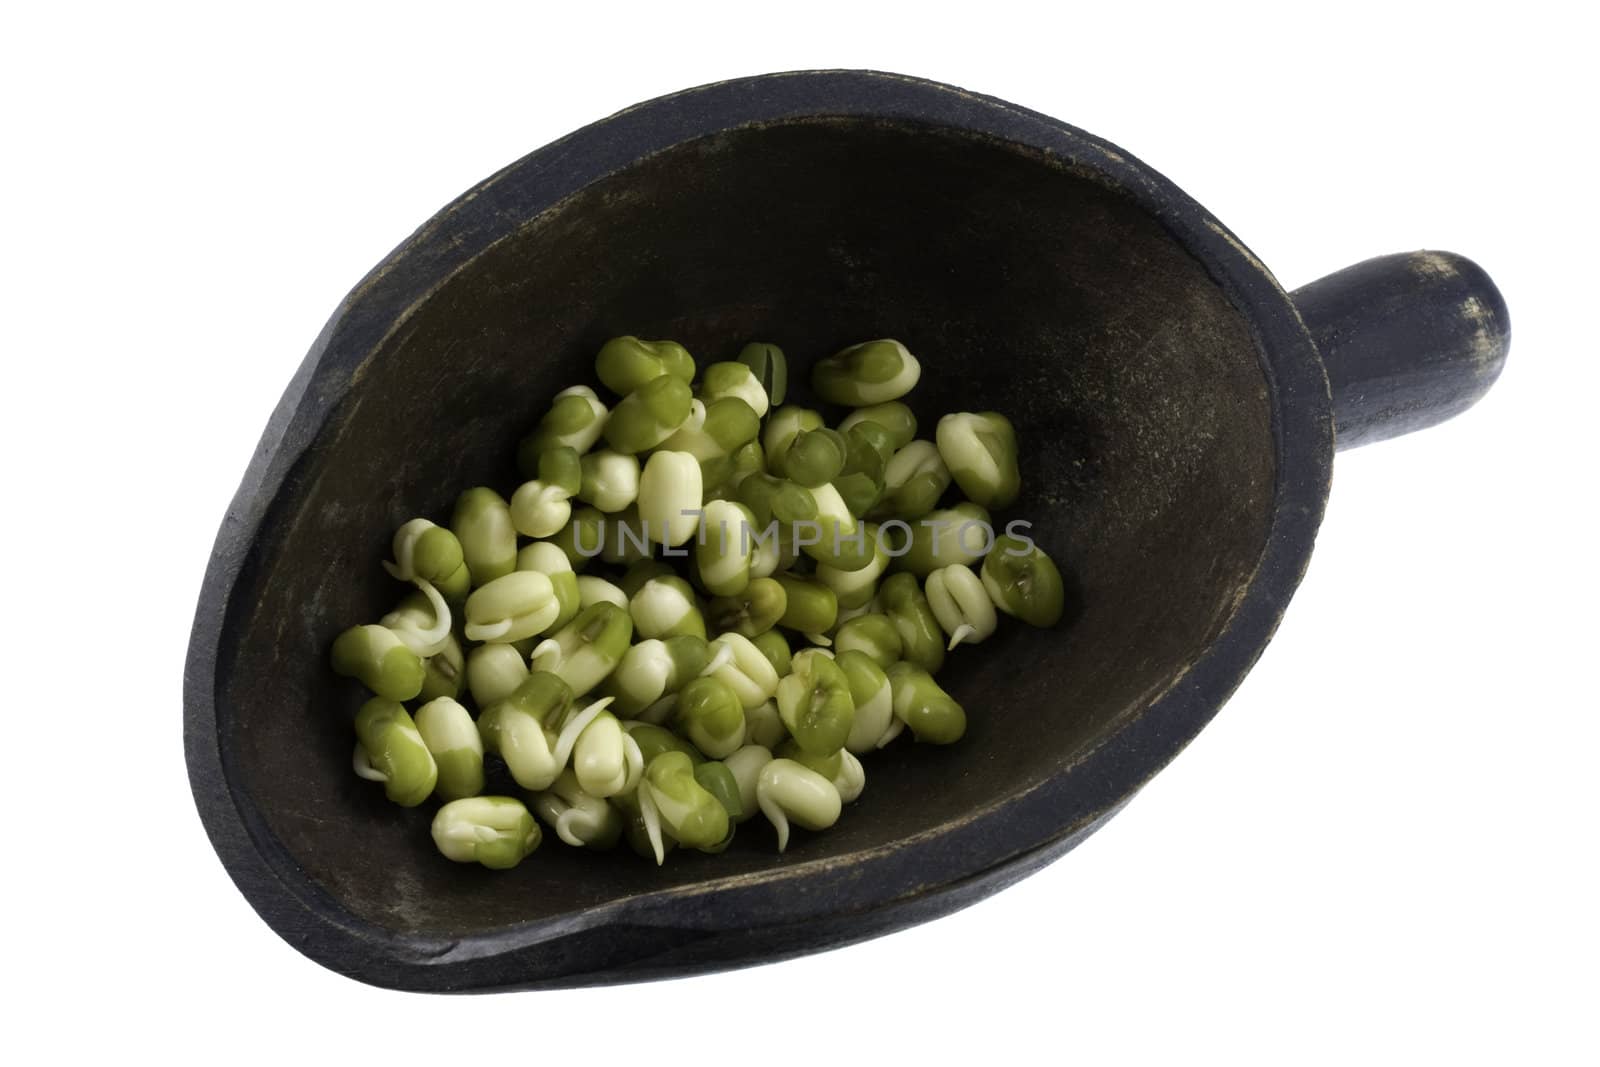 sprouting mung beans on a rustic wooden scoop isolated on white